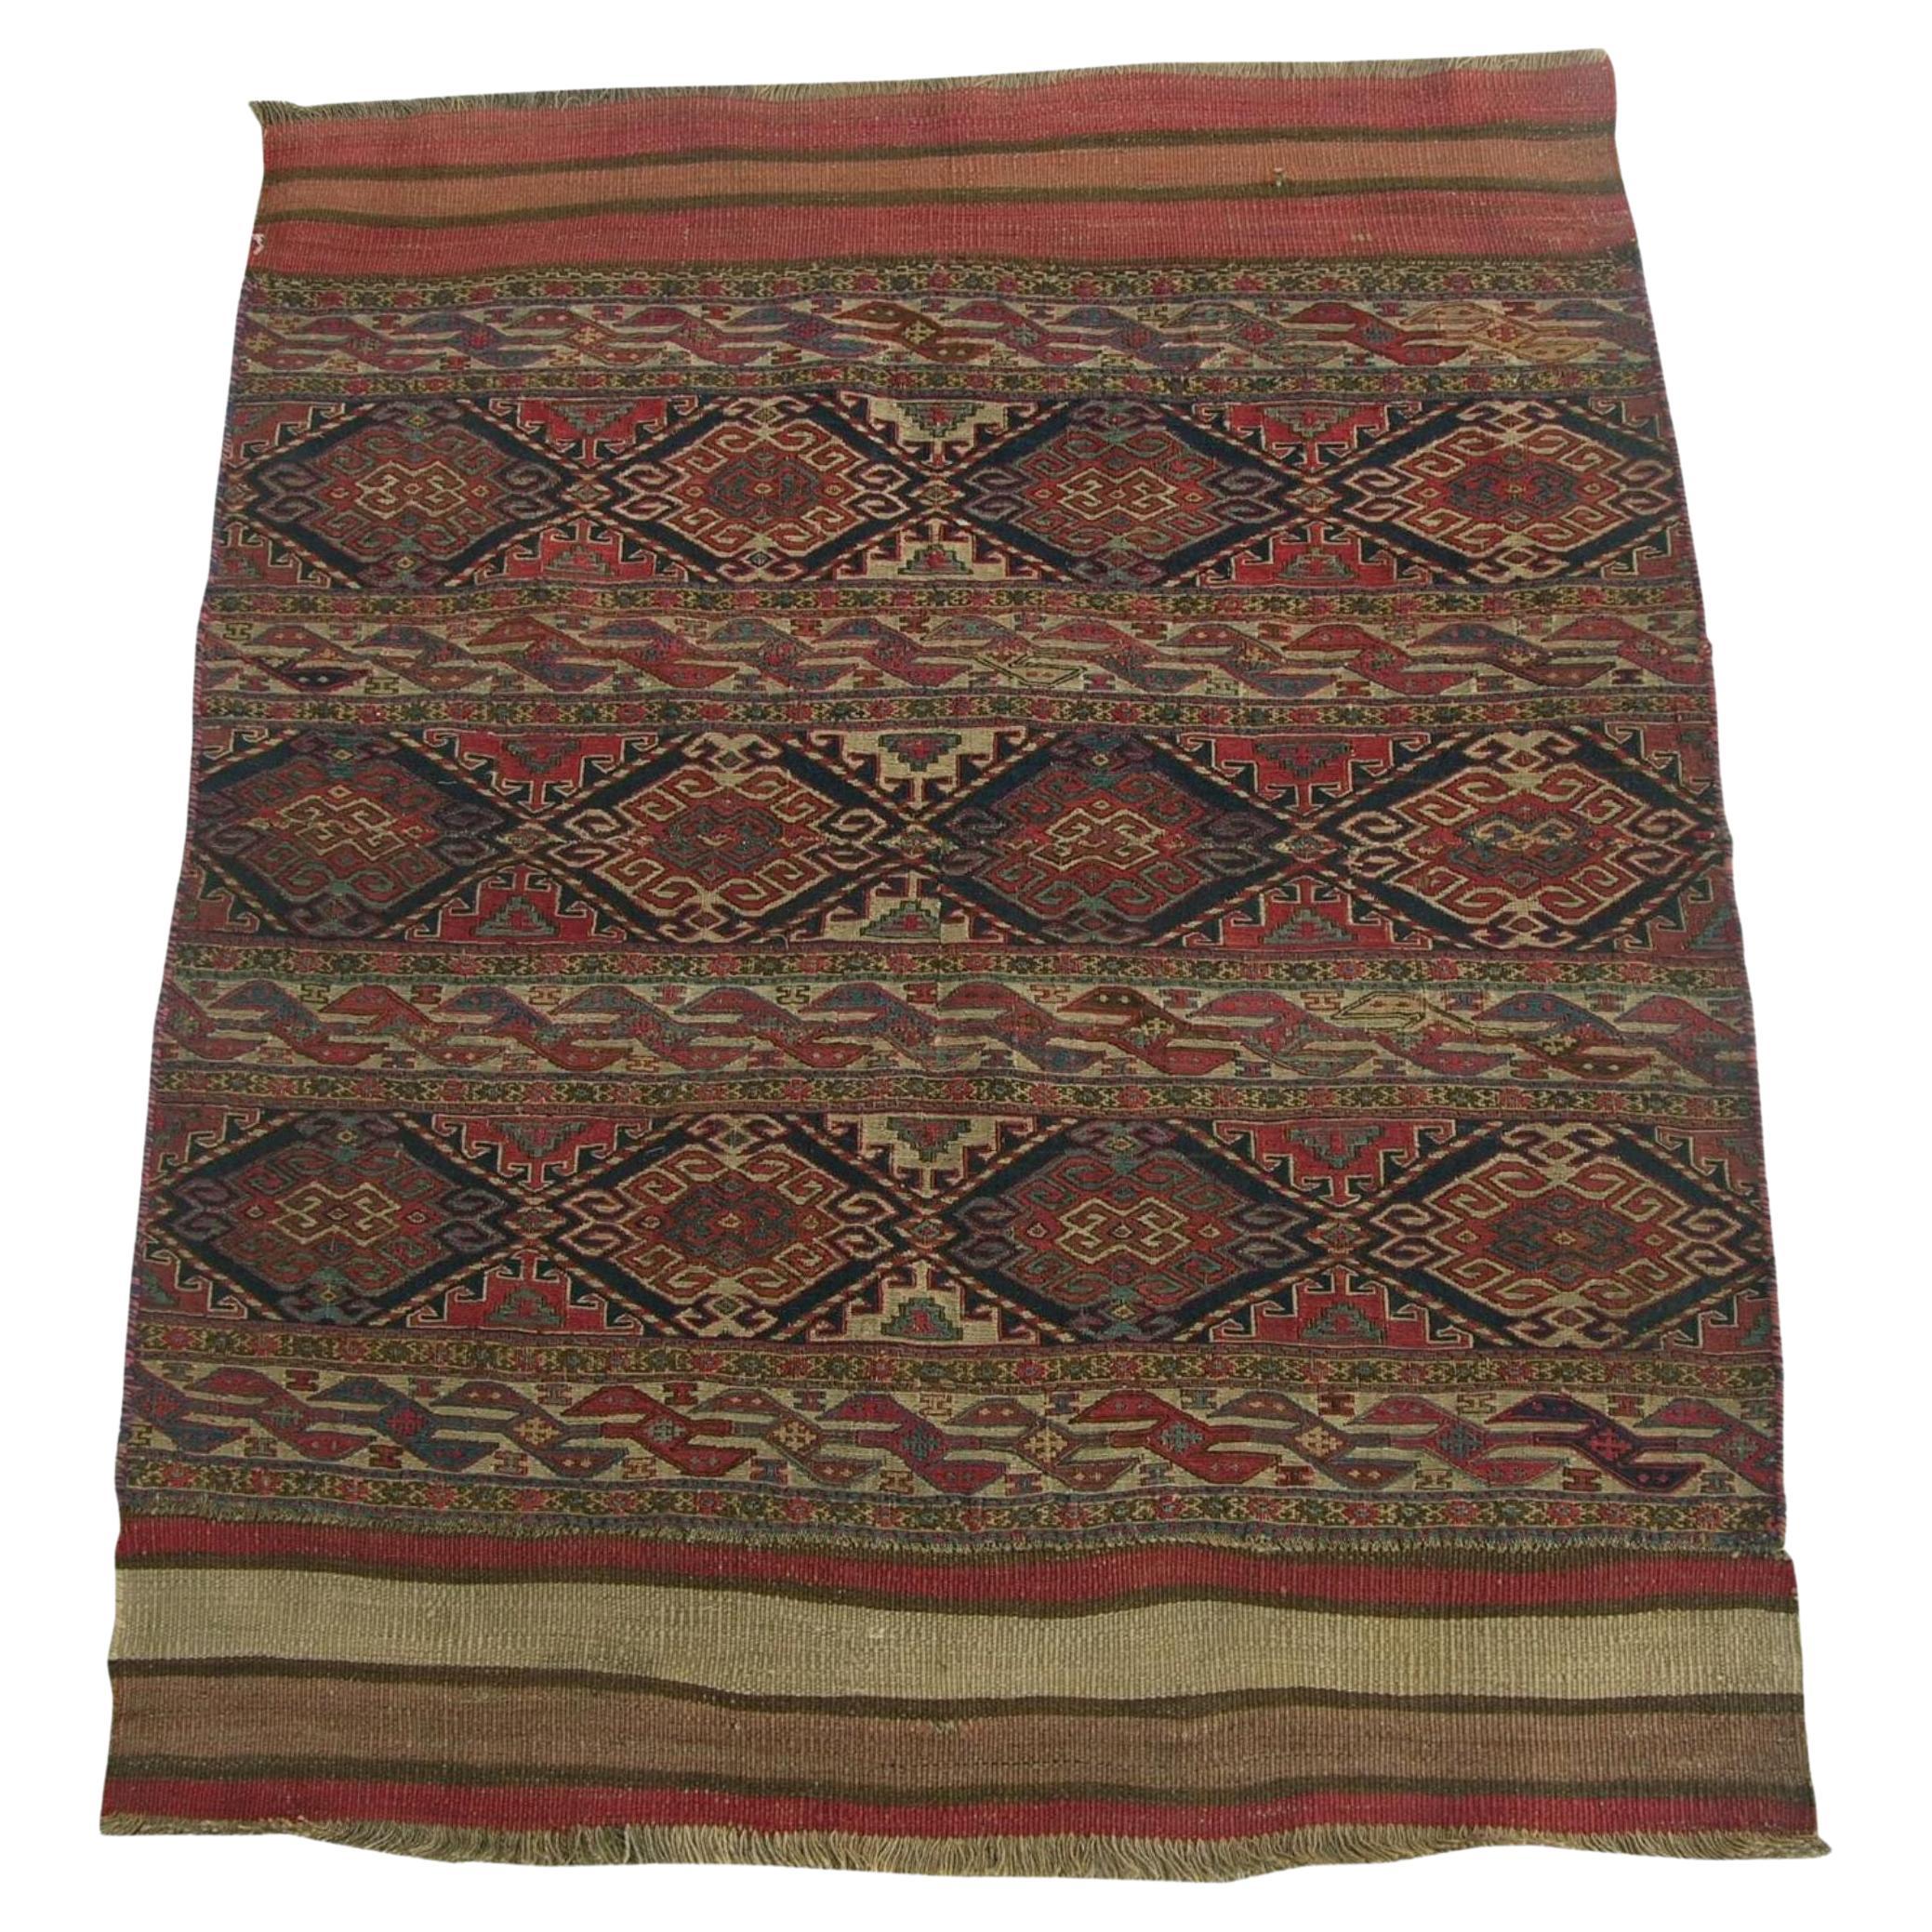 Early 20th Century Antique Shahsavand Fish Design Flat Weave Rug